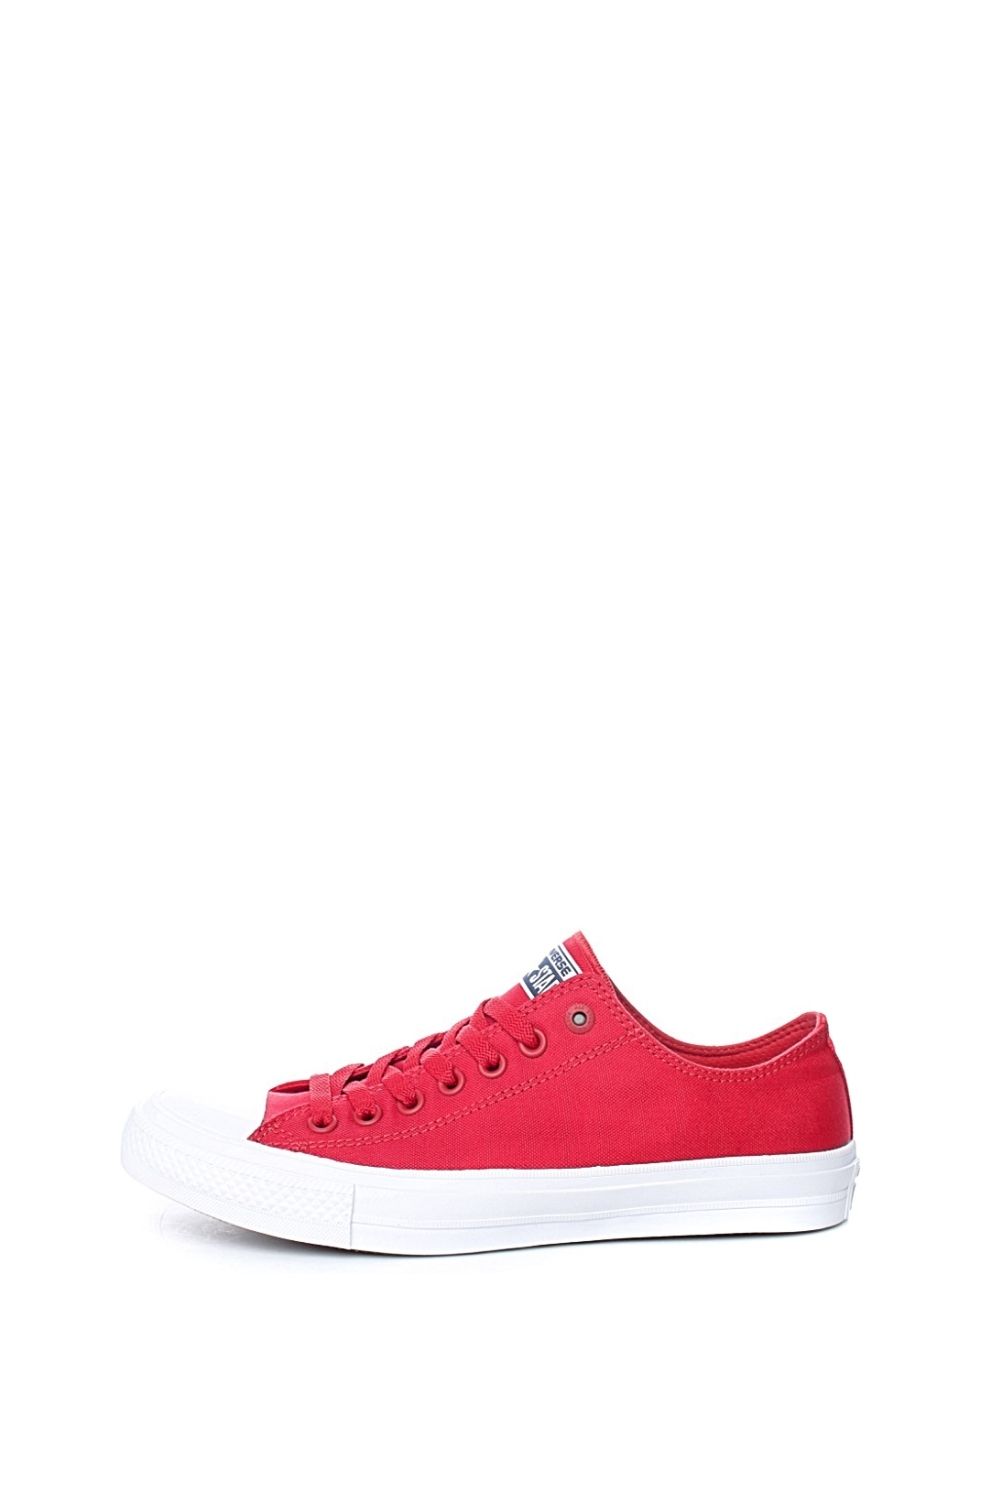 CONVERSE – Unisex sneakers CONVERSE Chuck Taylor All Star II Ox κόκκινα